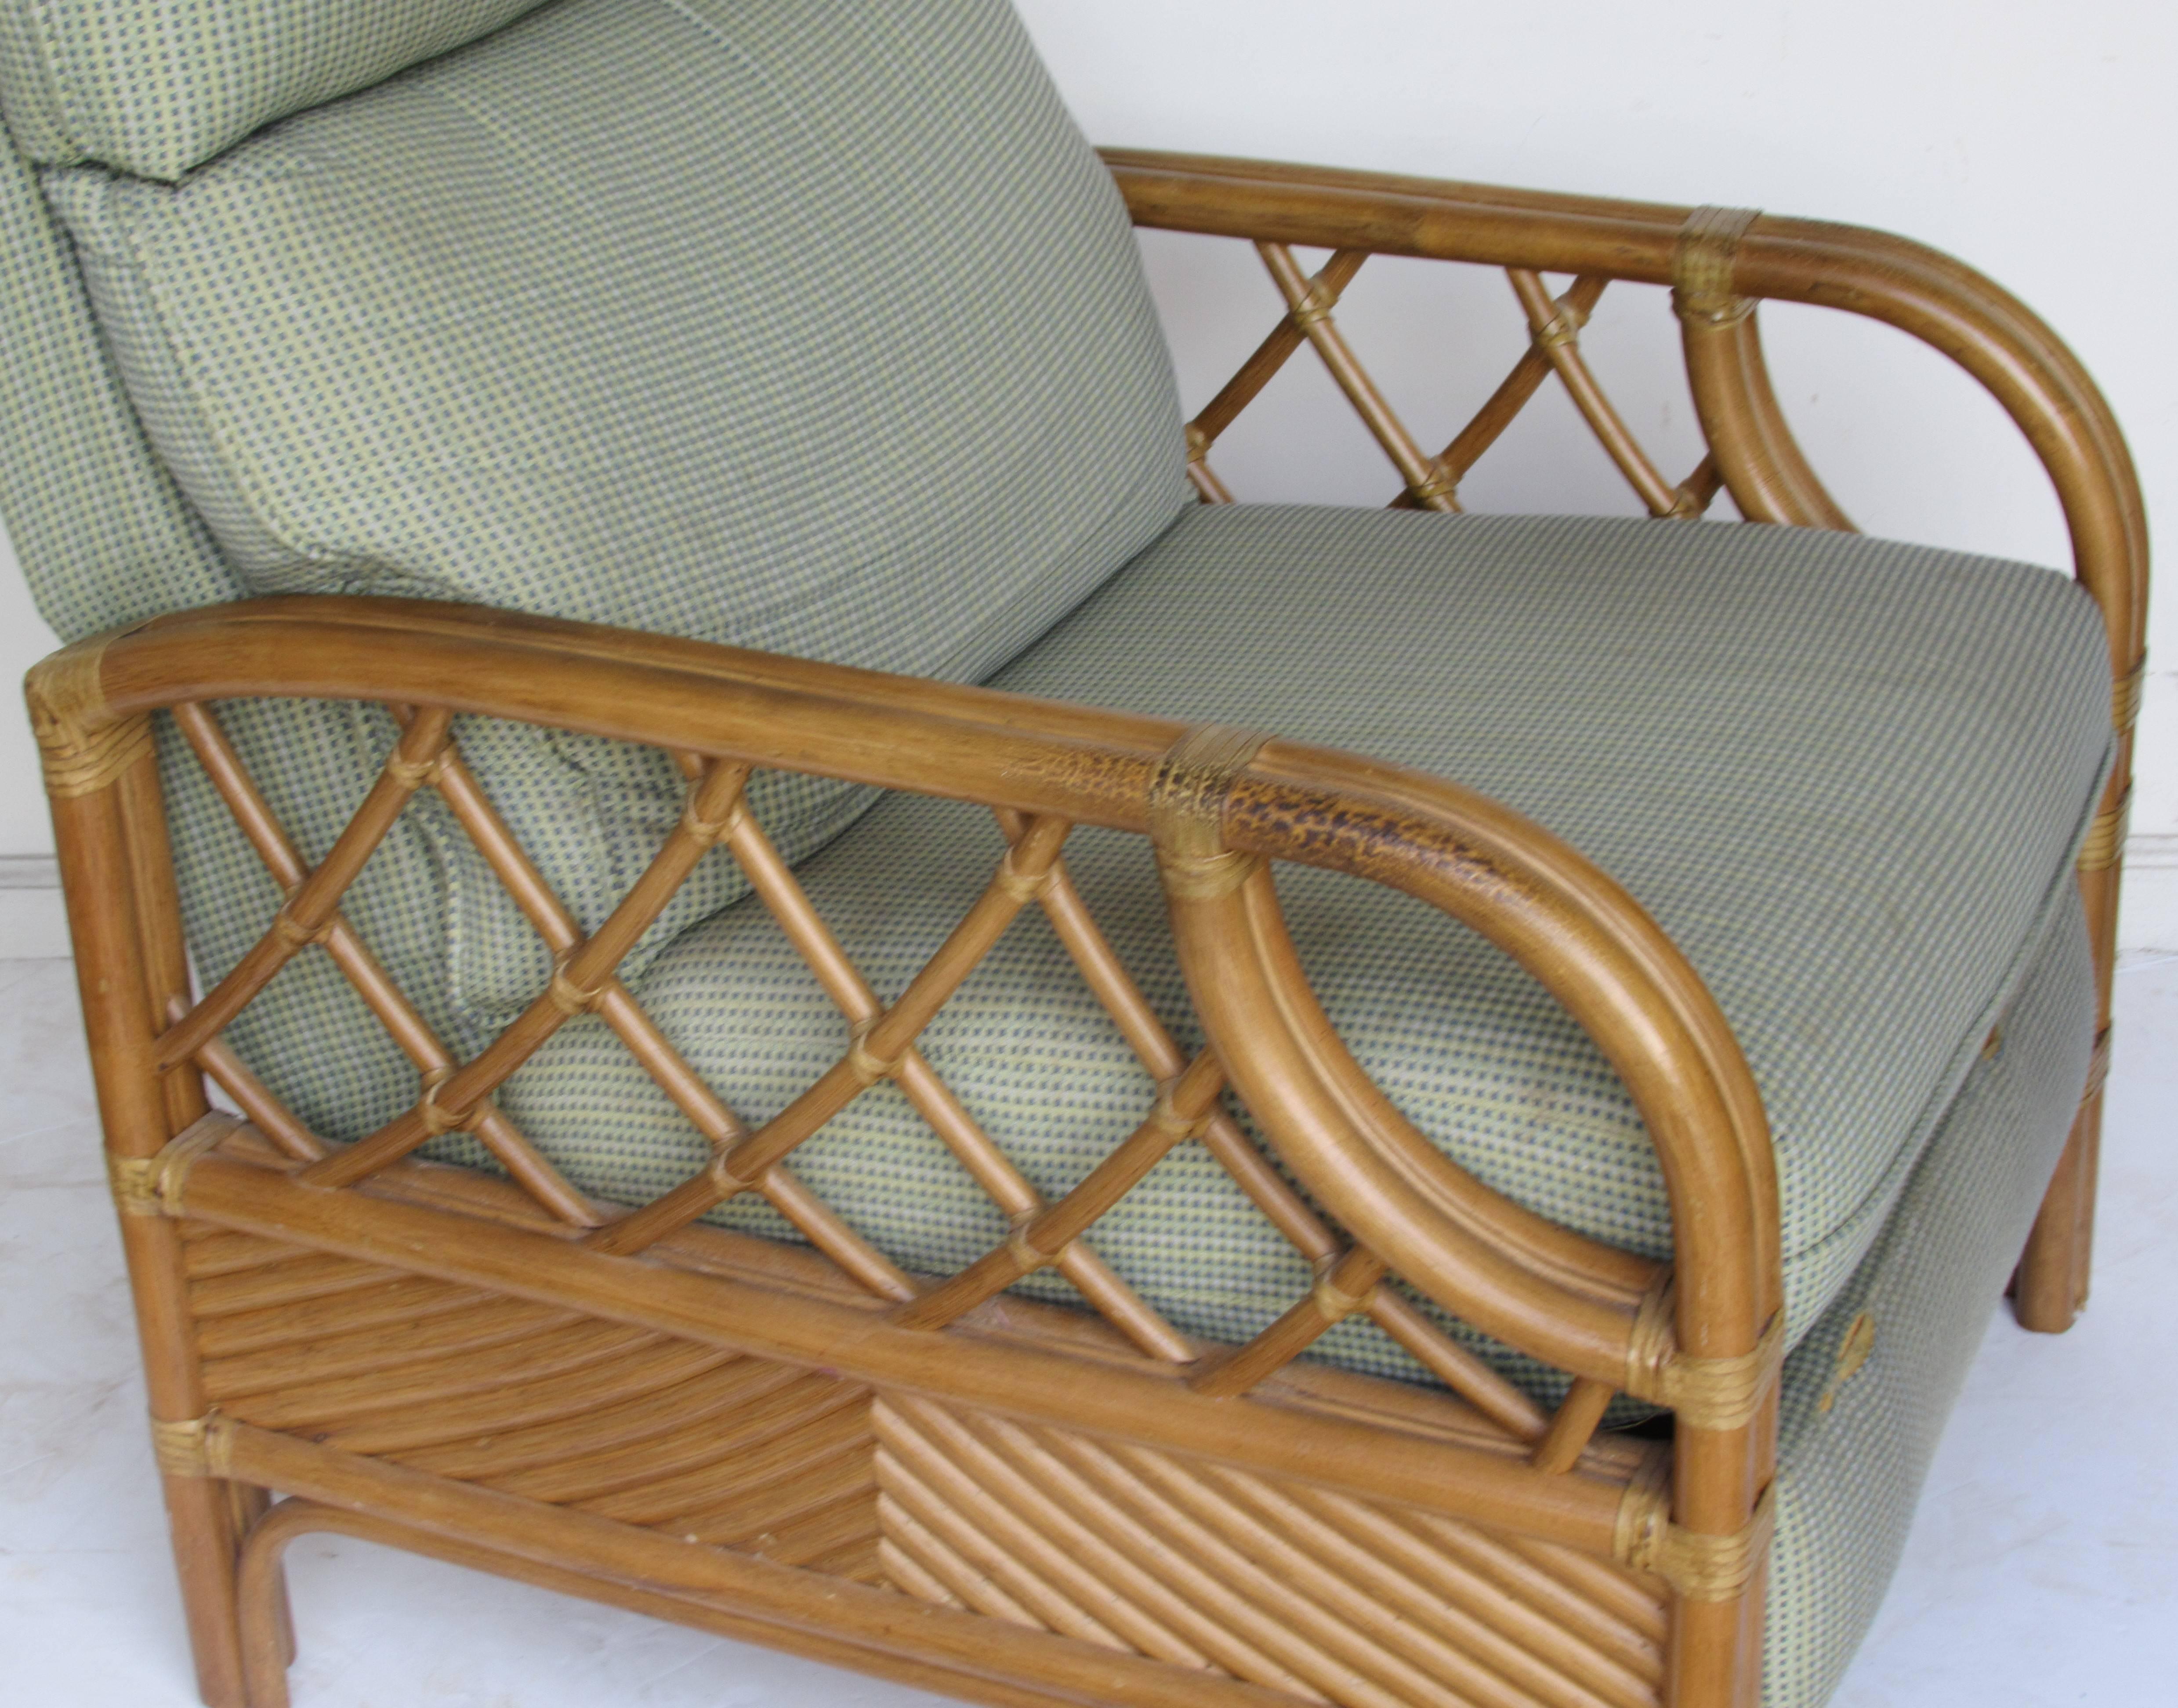 Large high back reclining rattan lounge chair by Lane Furniture Company / Venture Collection, good quality, circa 1980s. See all pictures.